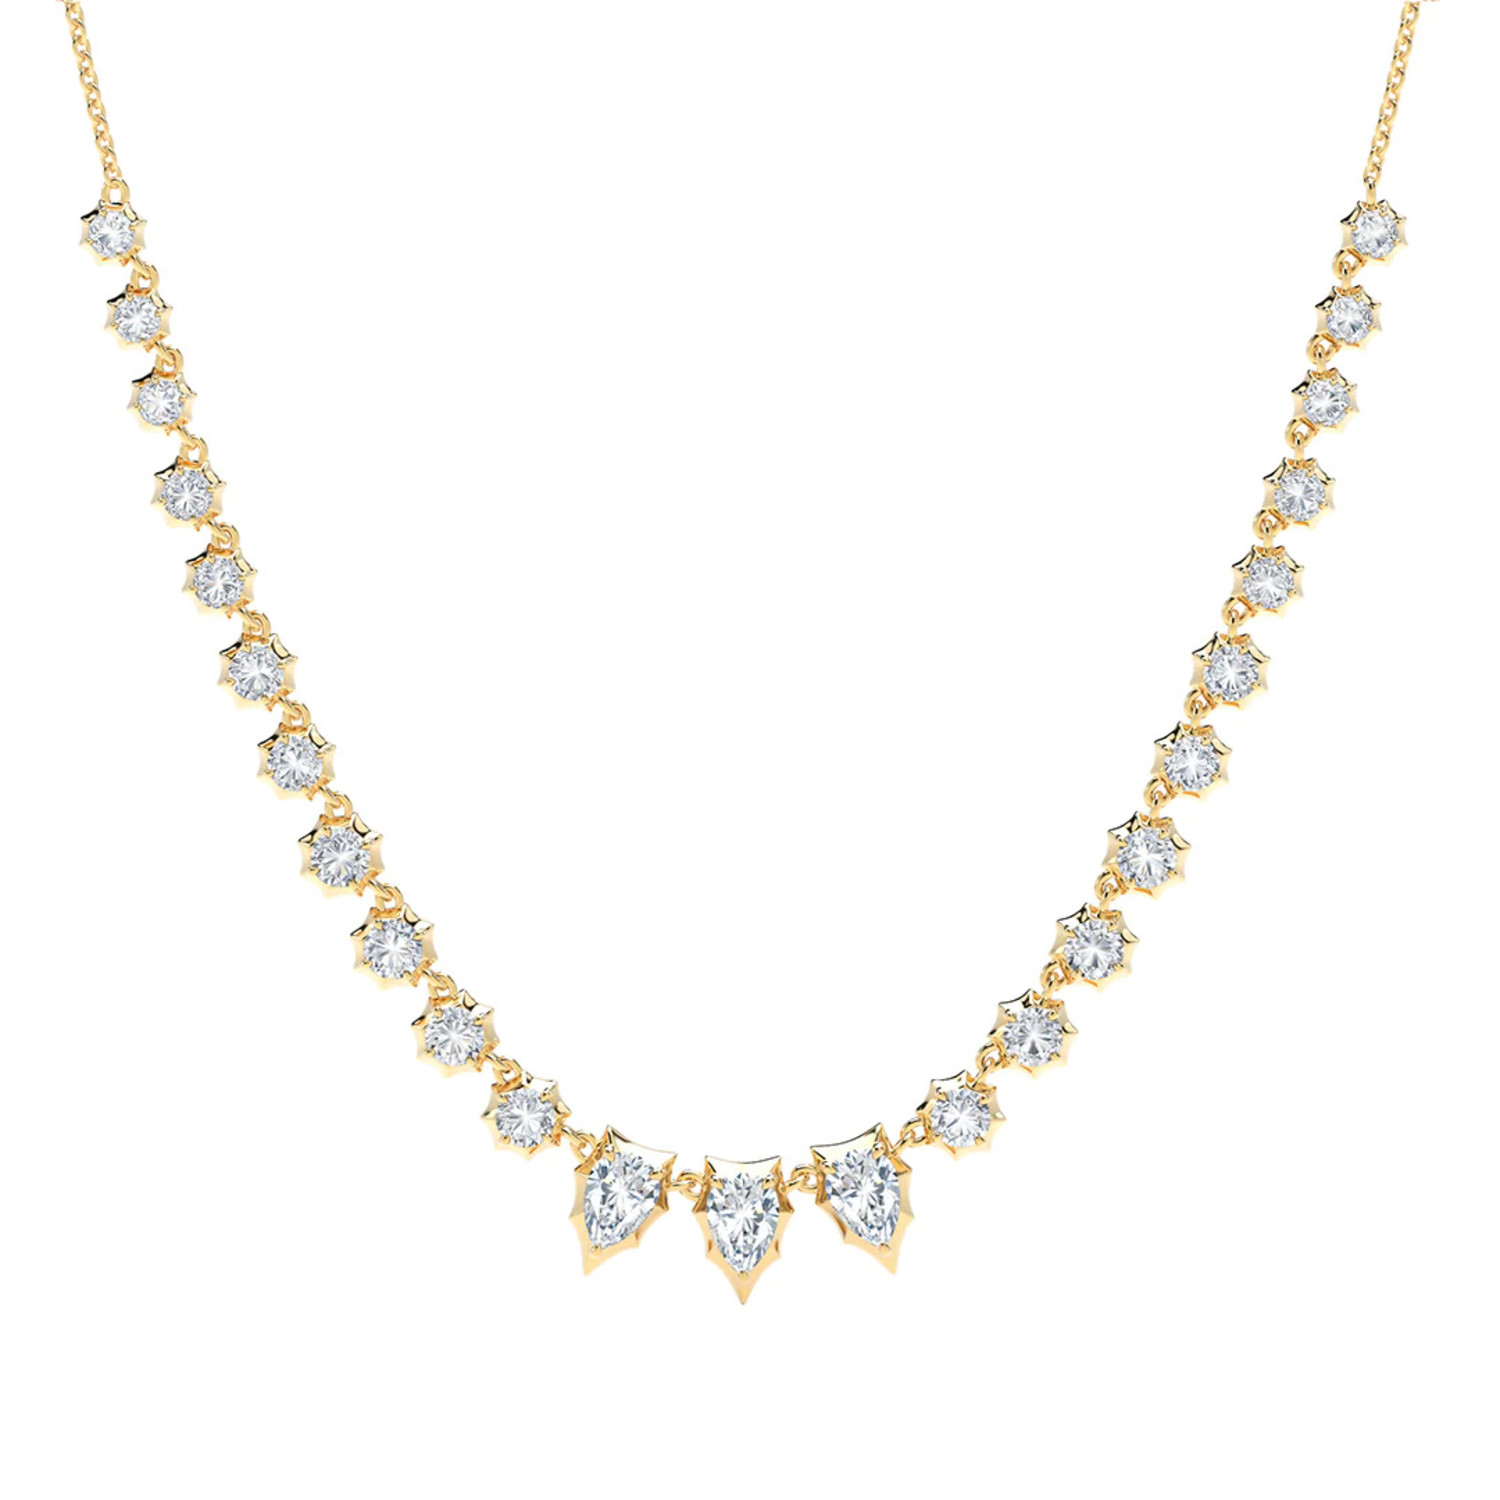 Envoy Riviera Necklace in 18K Yellow Gold